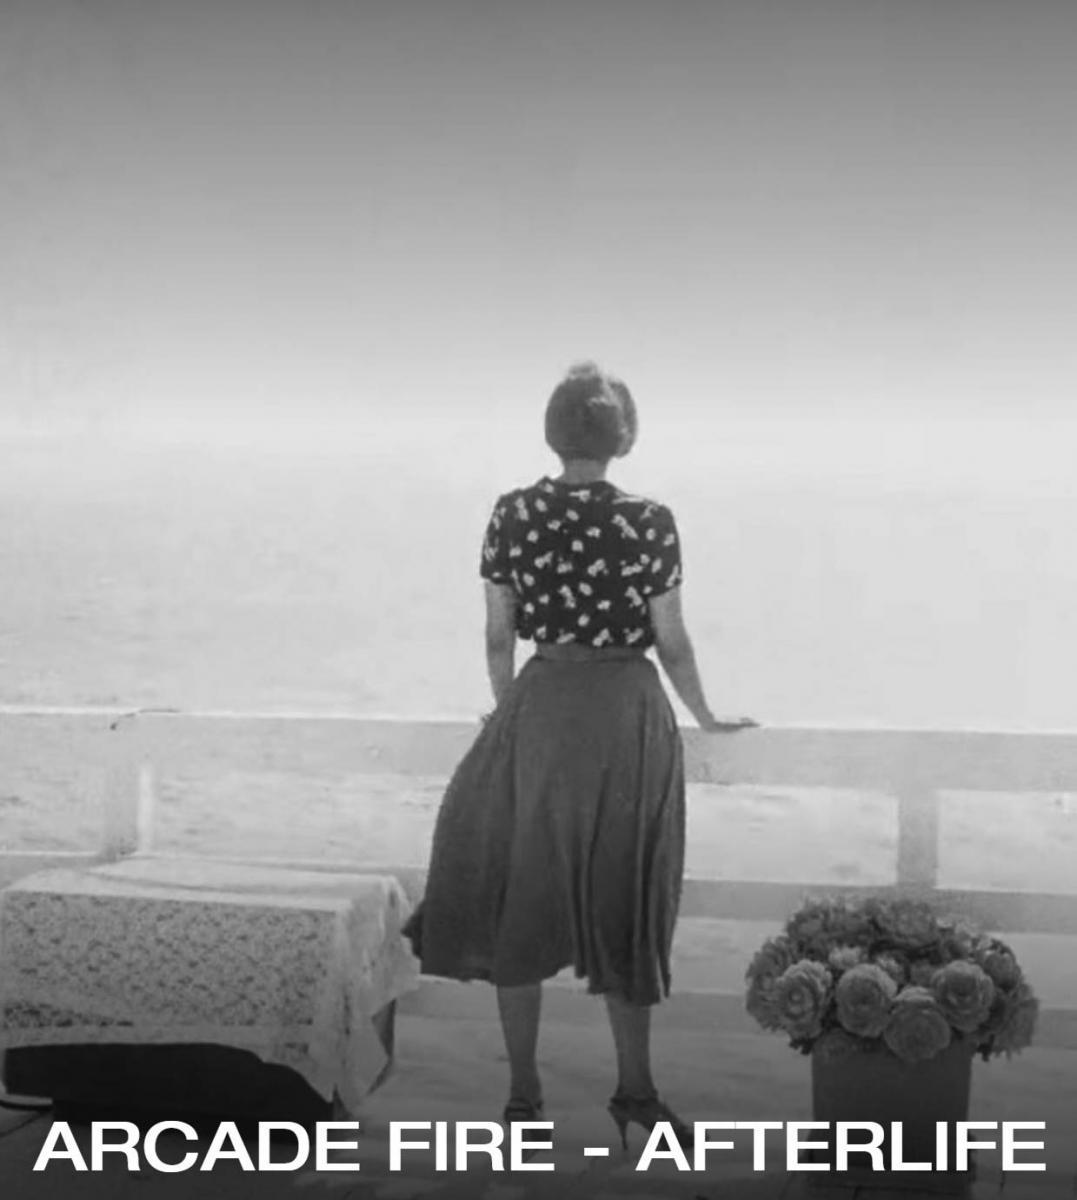 AFTERLIFE - Arcade Fire